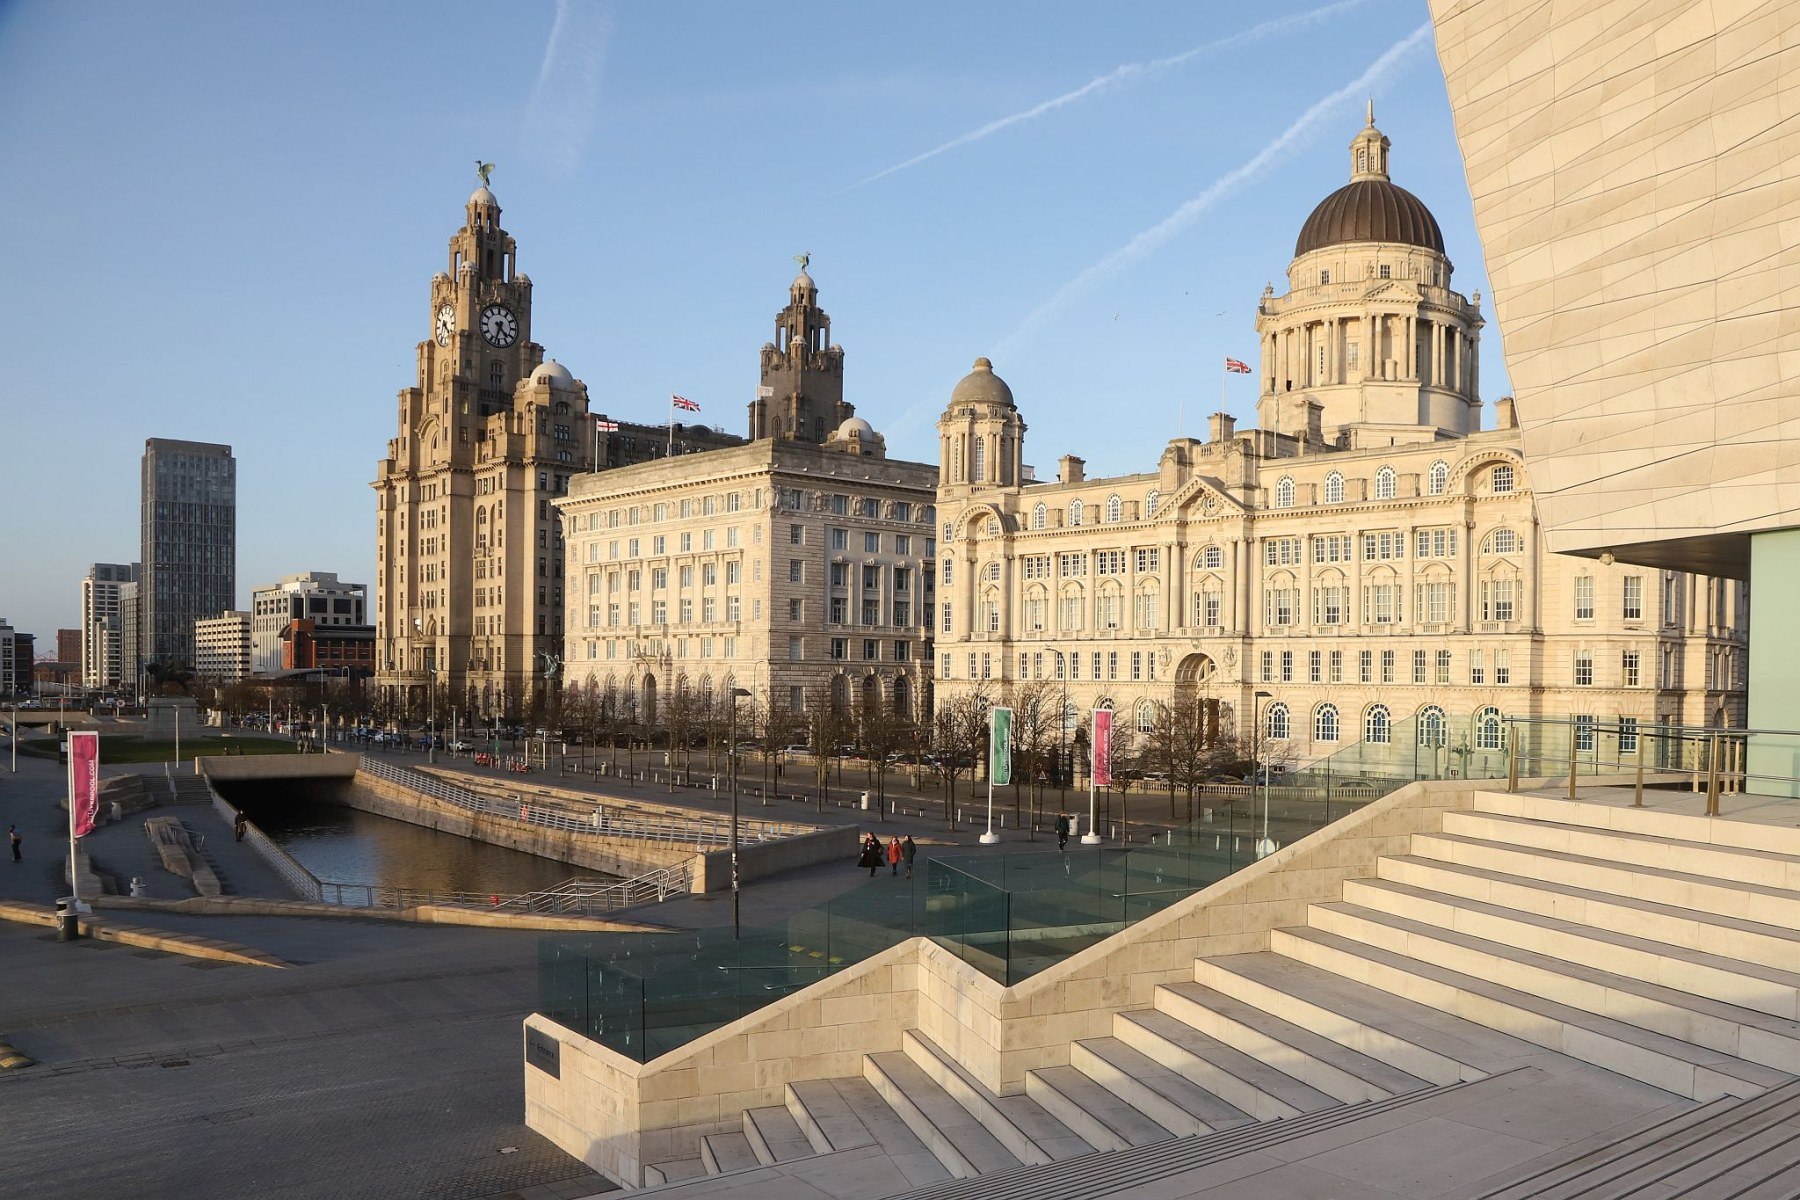 Royal Liver Building 360 Tower Tour, the Three Graces of Liverpool Waterfront and Pier Head seen from the steps of the Museum of Liverpool